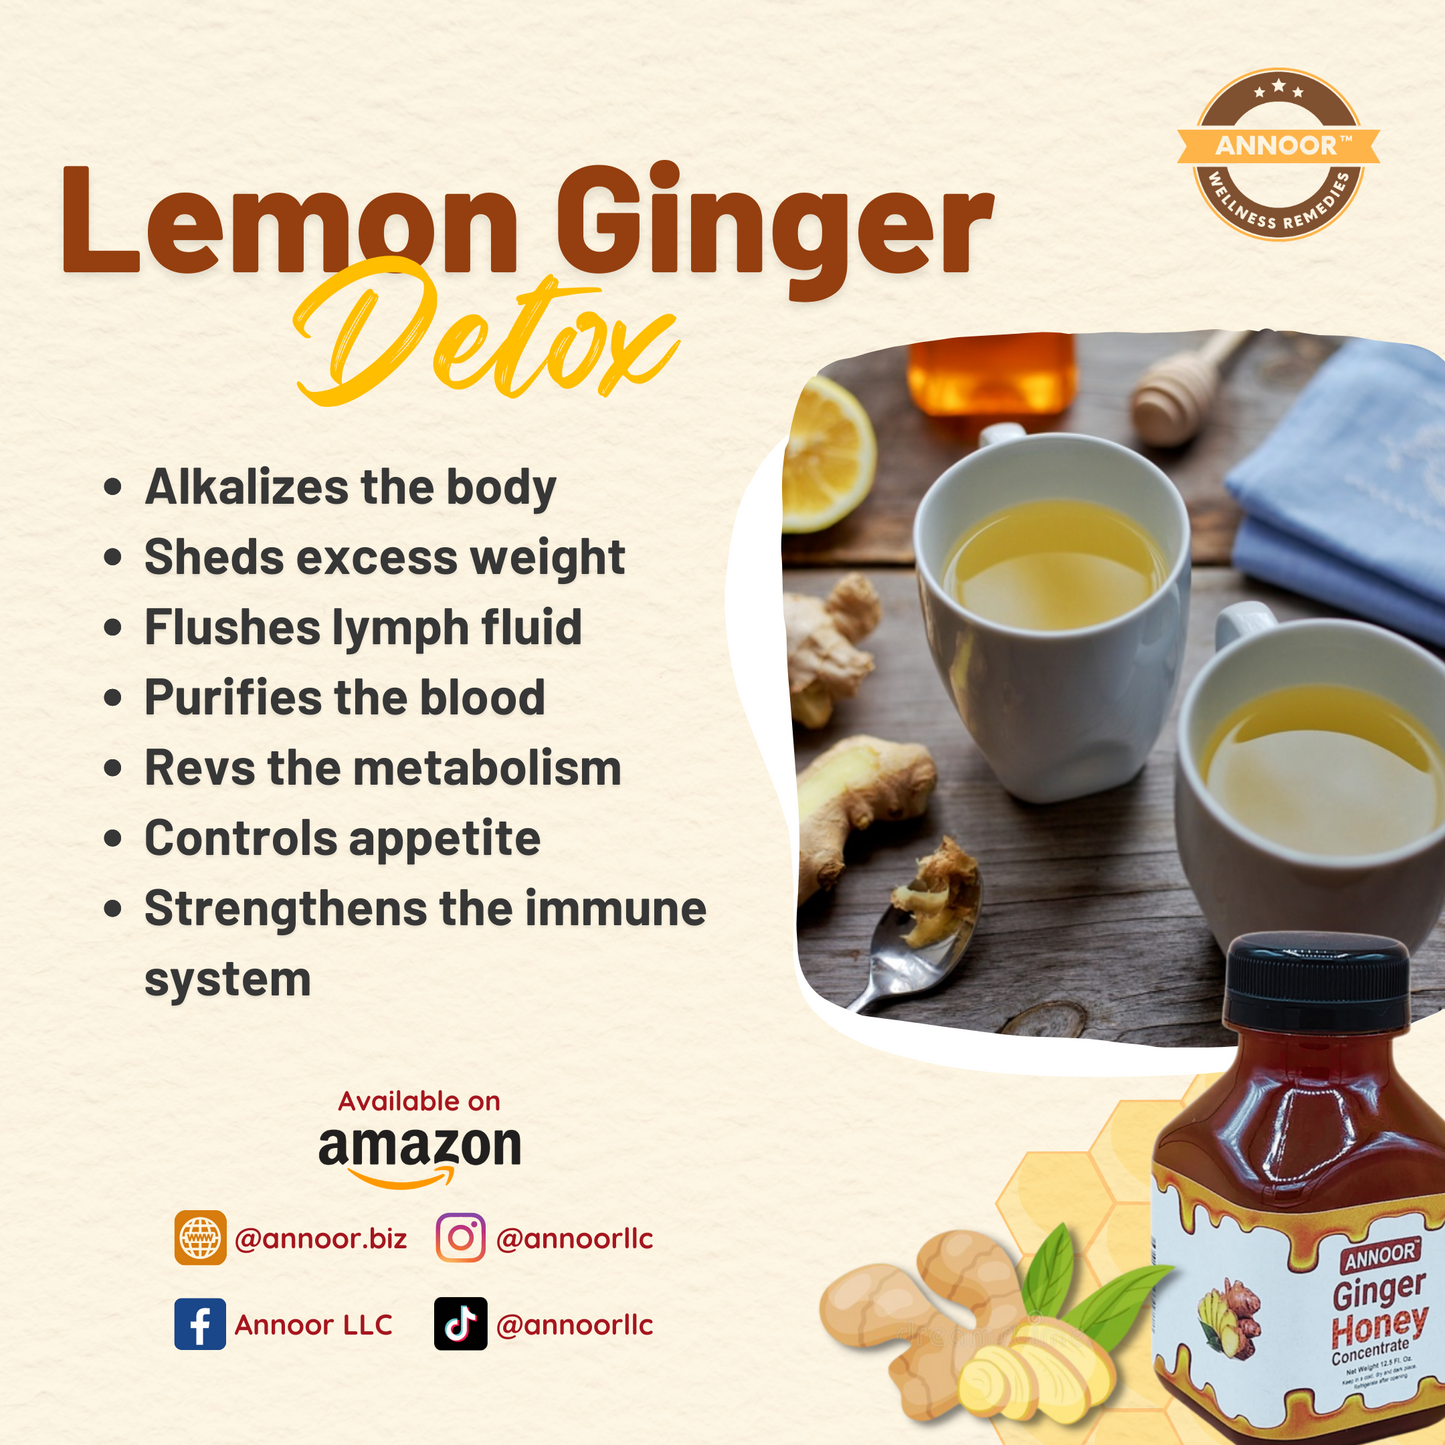 Ginger Honey Syrup By Annoor | 8.5 Fl Oz | NFC | Raw Wildflower Honey and Cold Press Ginger Juice | No Pulp | Use in Tea, Coffee, Cocktail, Water Taste Enhancer, Health Shots, Salad Dressing & Cooking